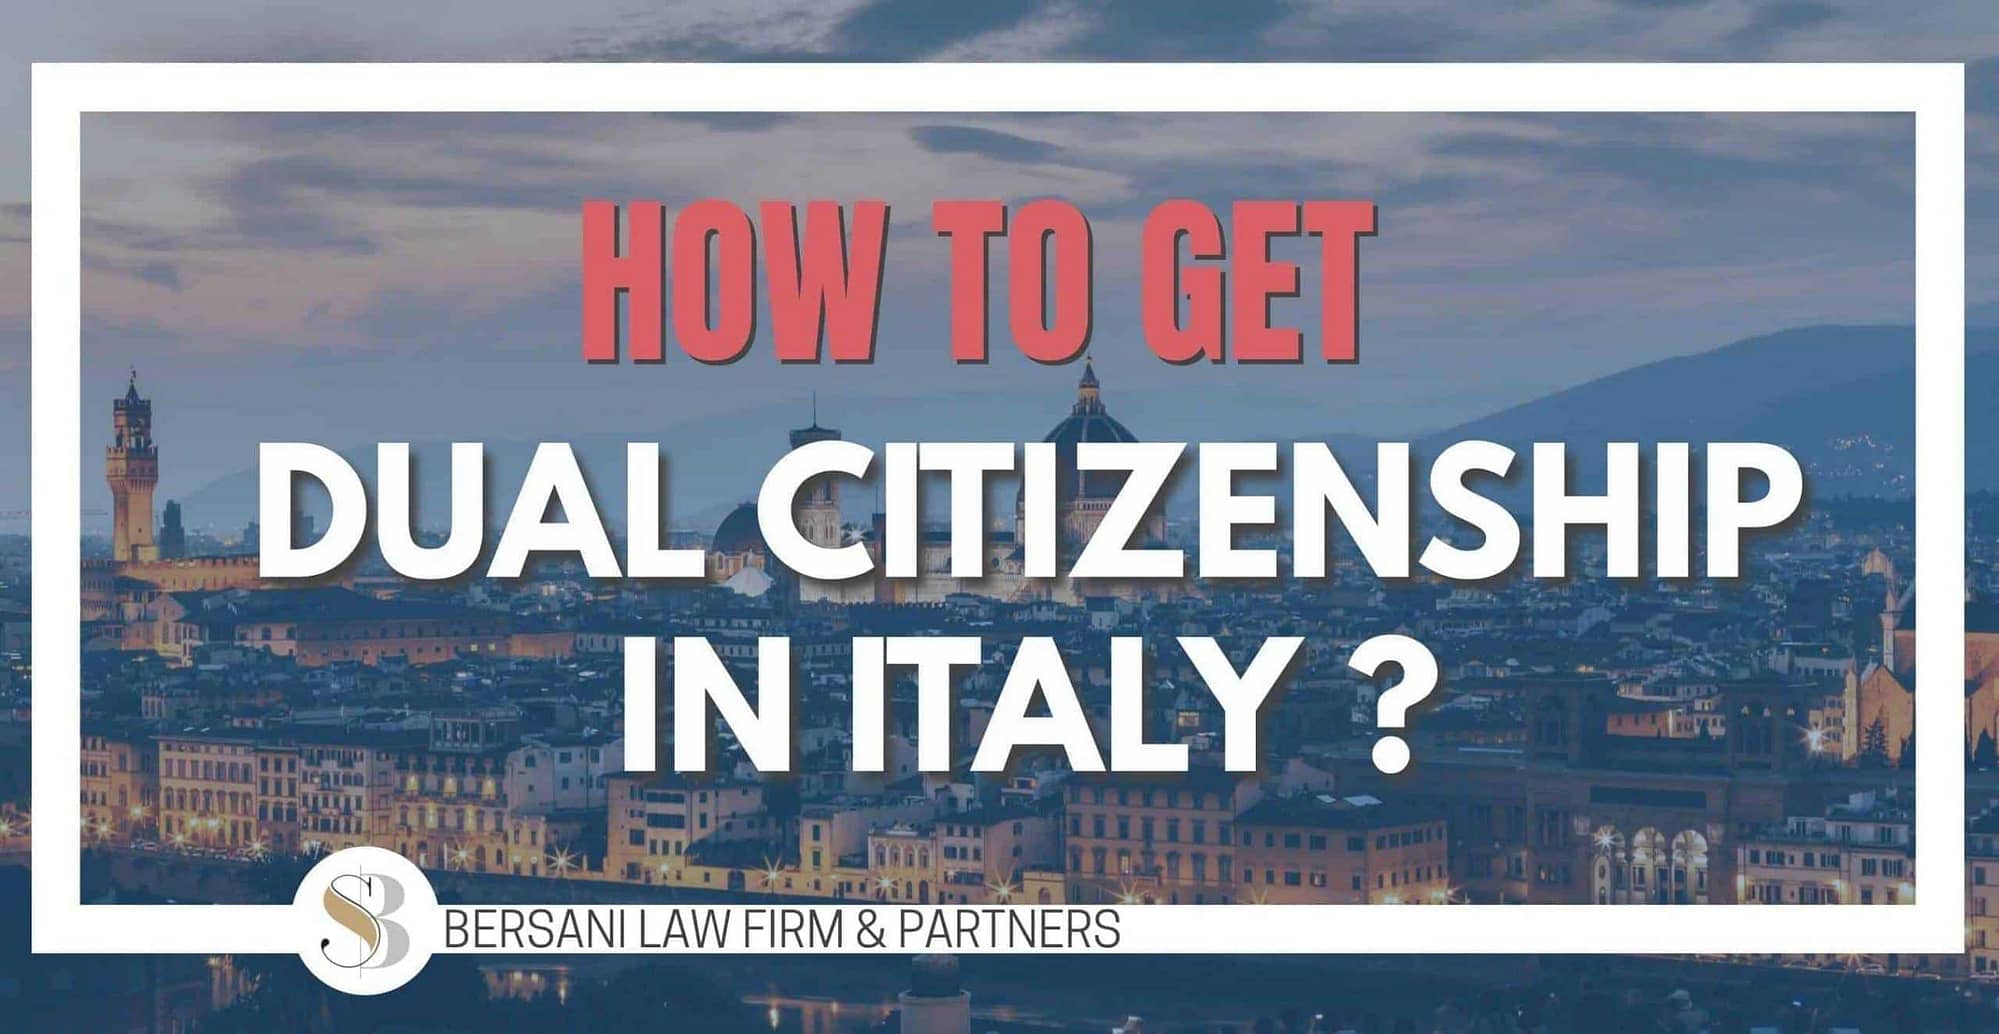 how-to-get-dual-citizenship-in-italy-2021